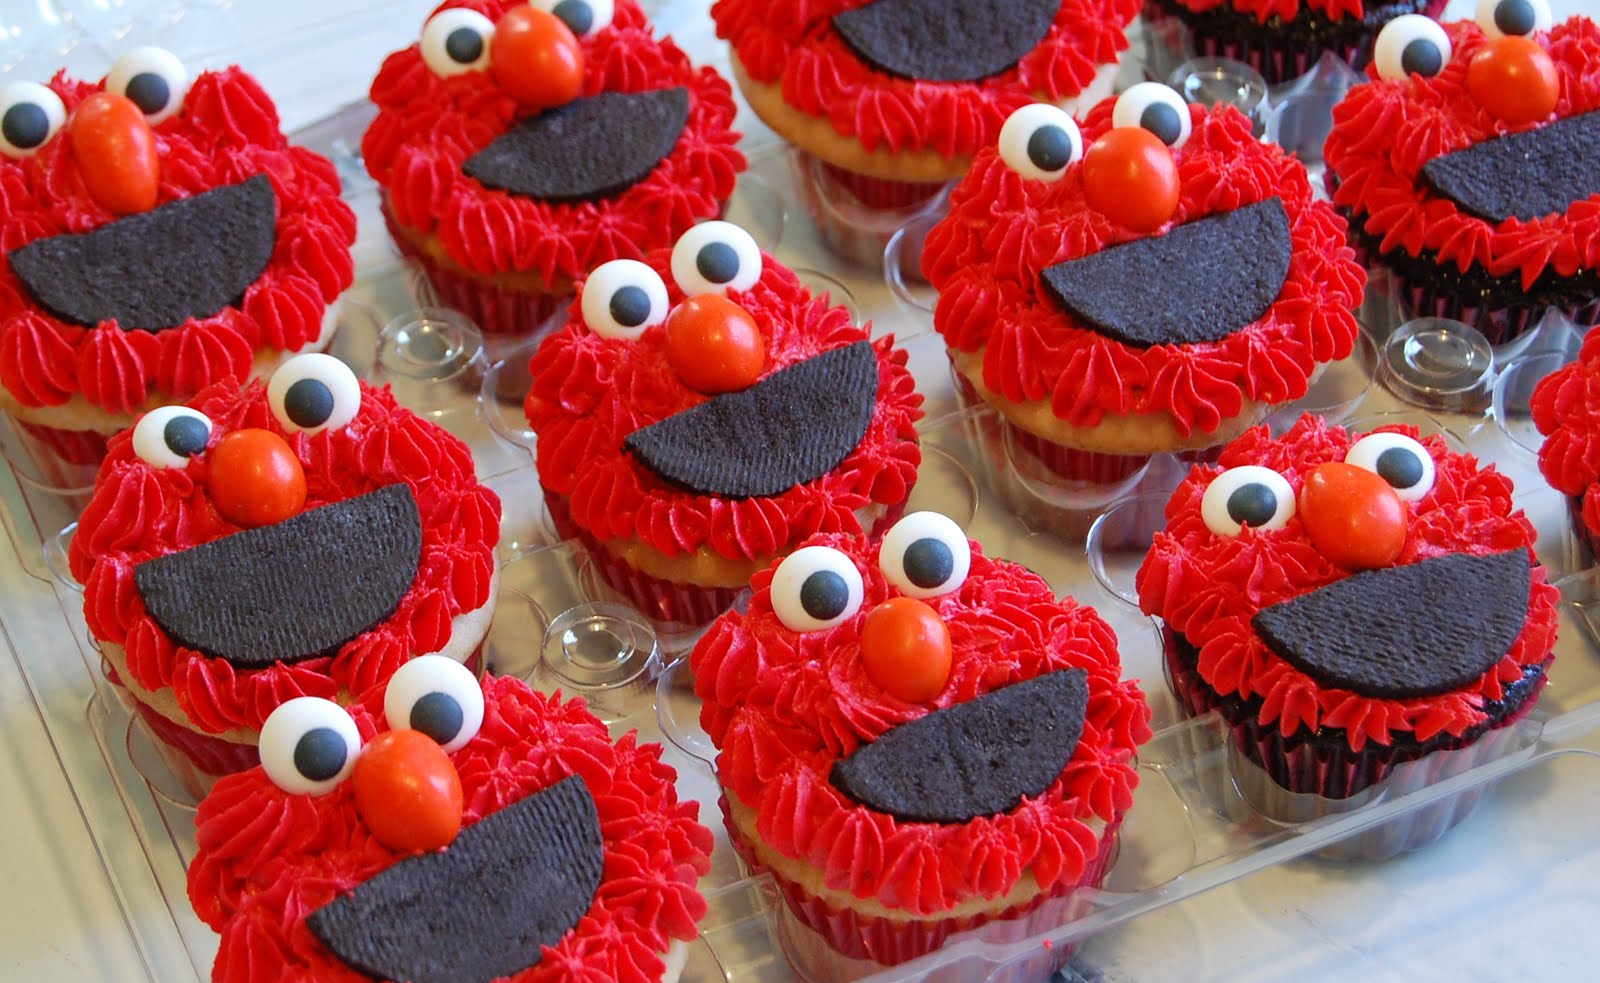 Pictures Of Elmo Cupcakes 89